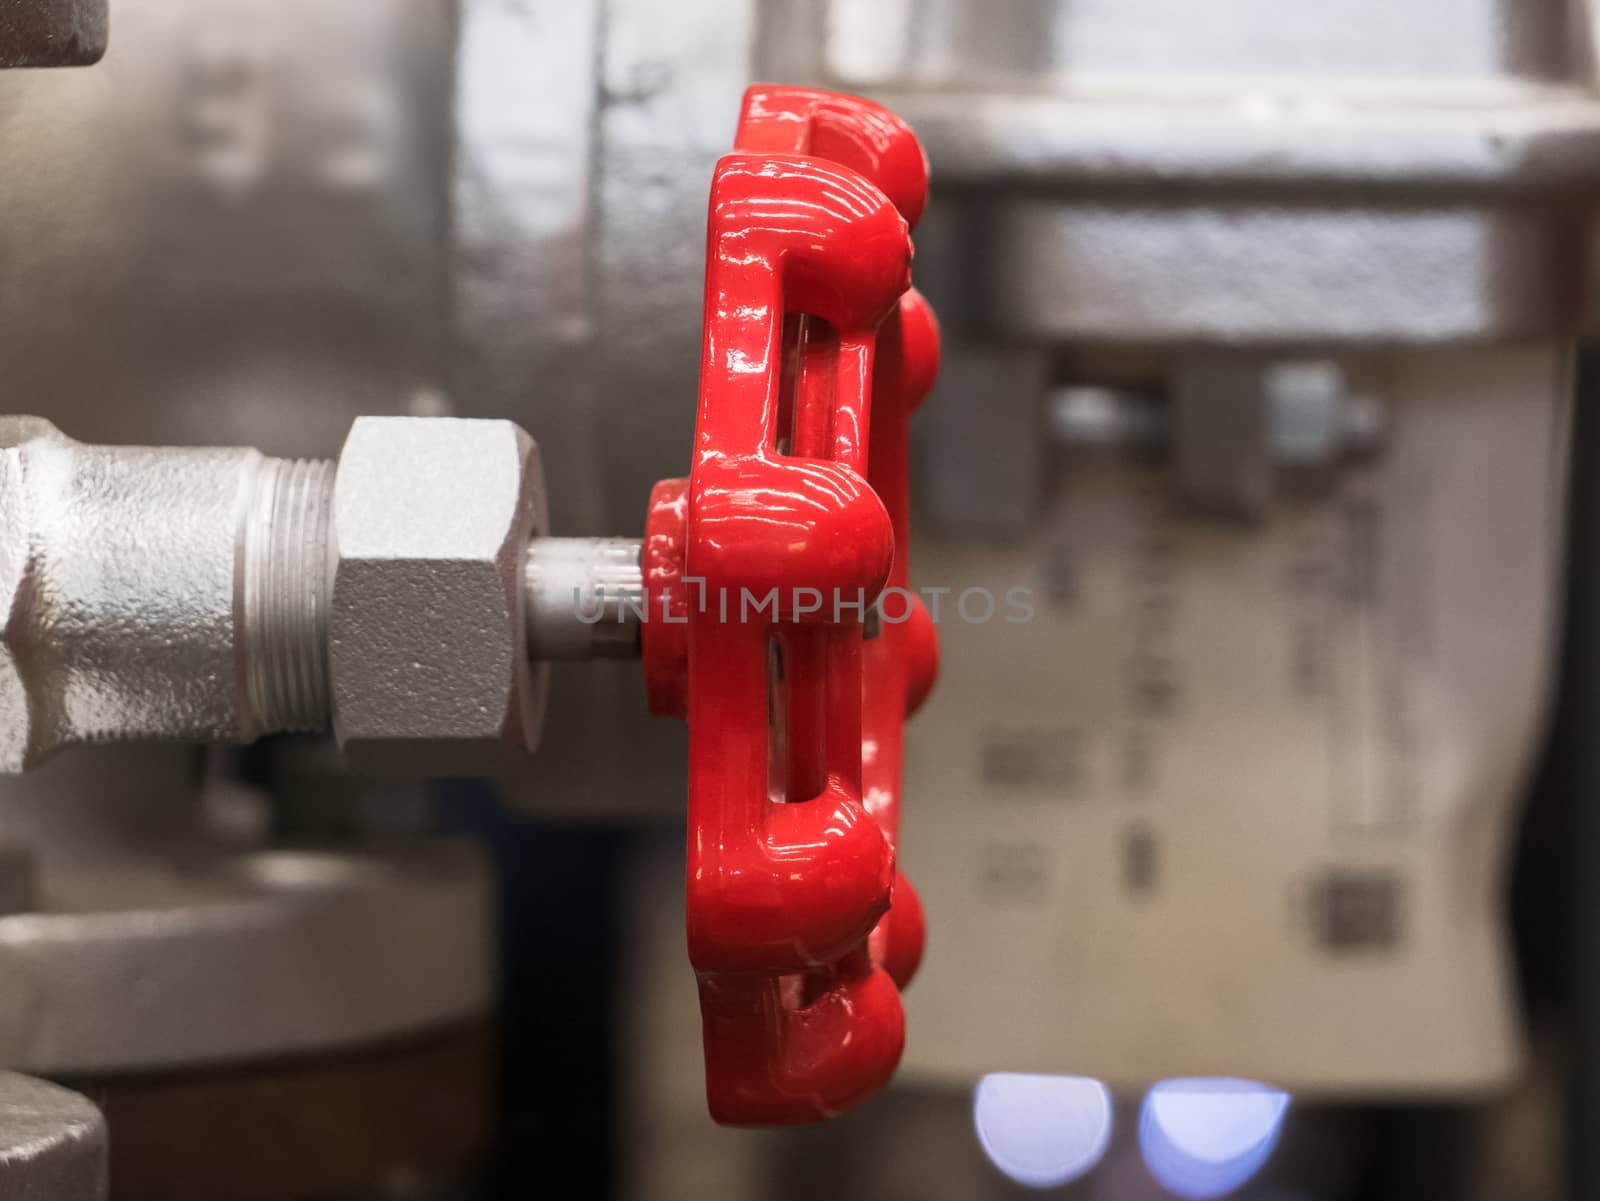 Red valve handle in industrial environment. Shallow depth of field with only the handle in focus.